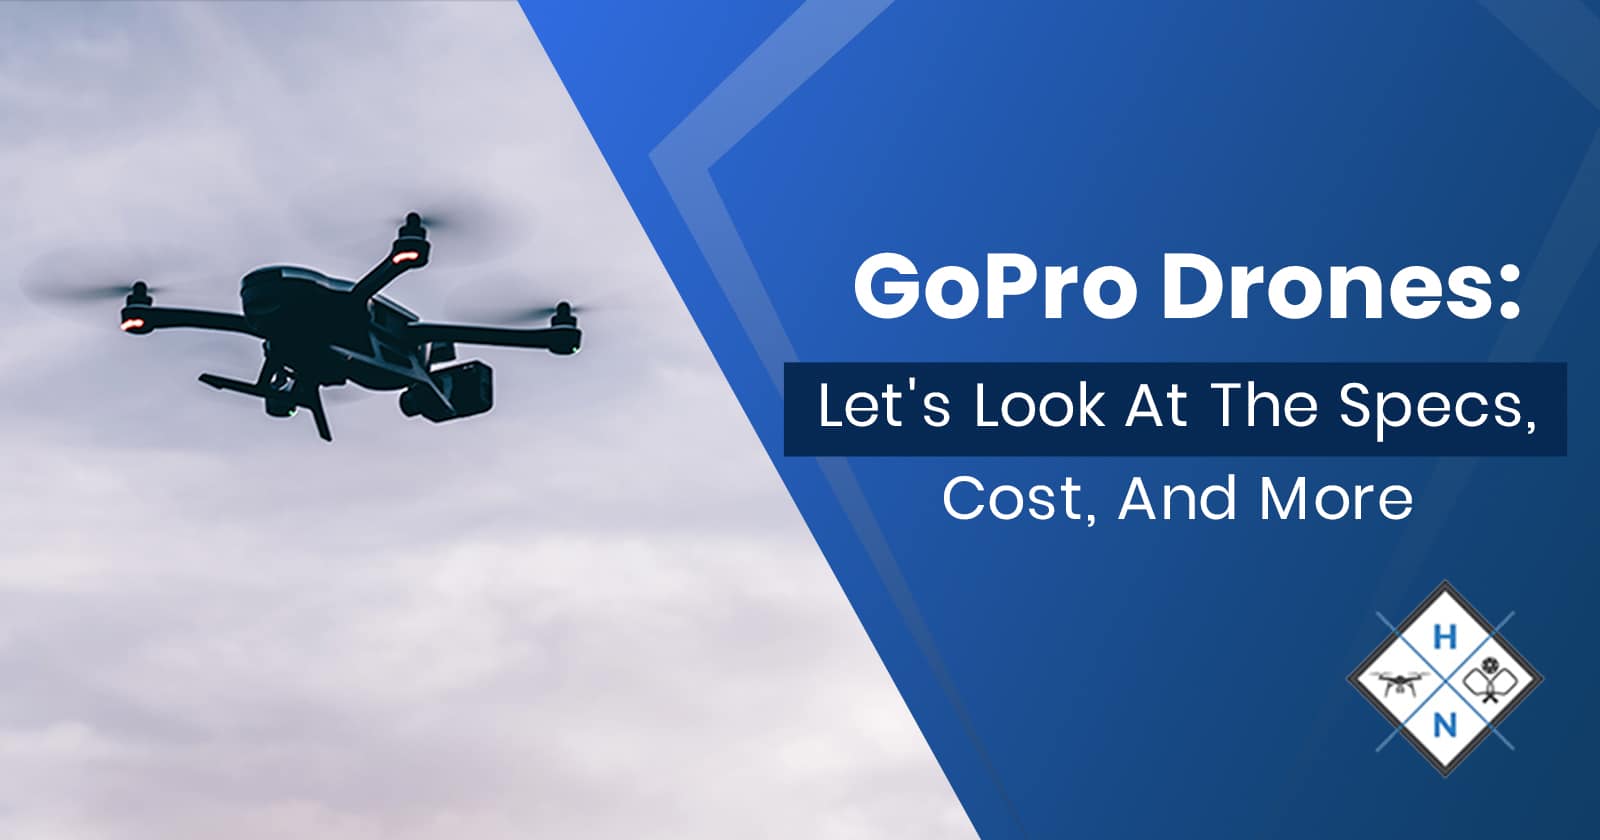 GoPro Drones: Let's Look At The Specs, Cost, And More